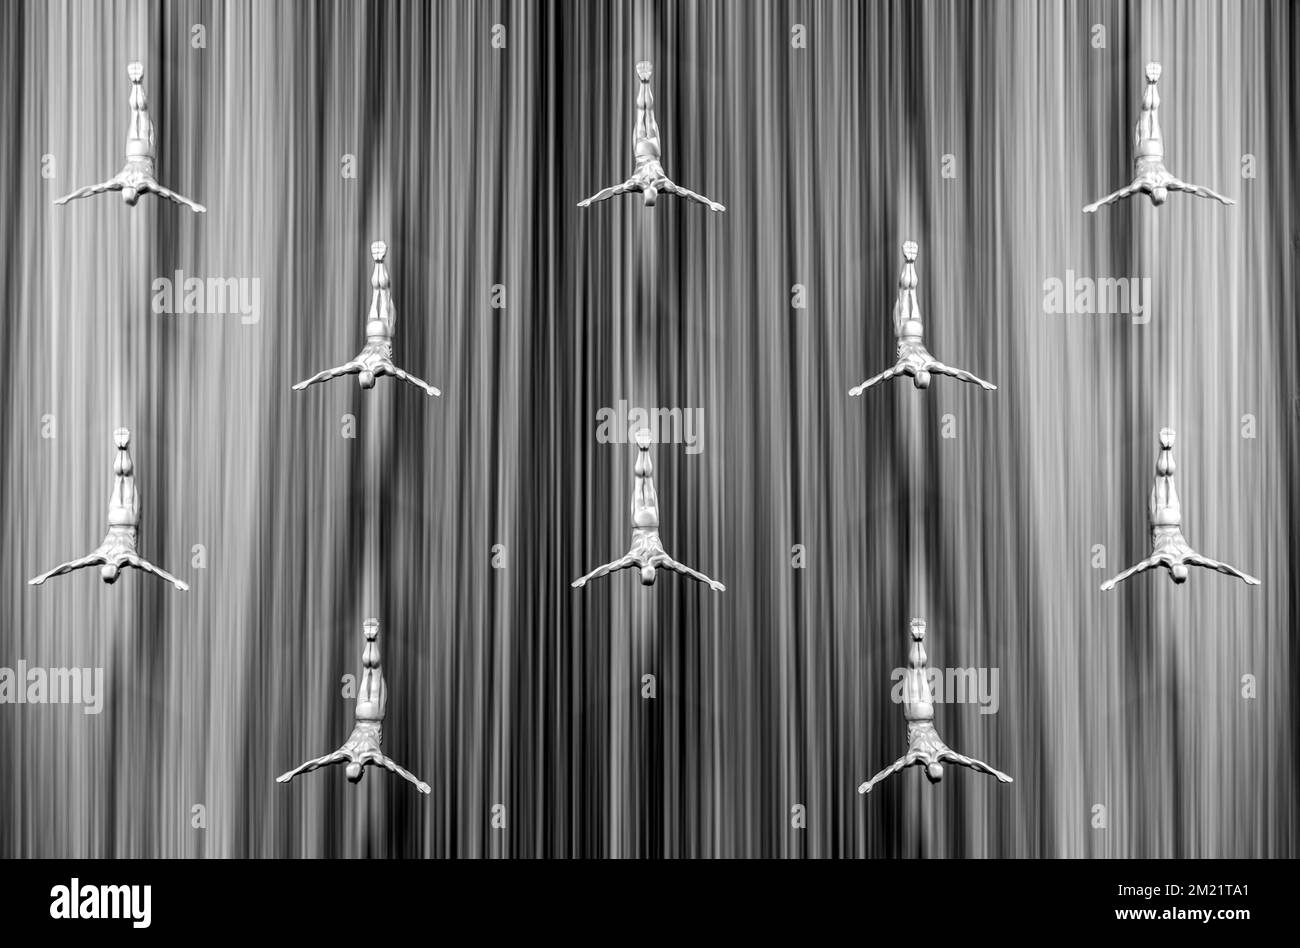 Dubai, UAE - July 19, 2018: The waterfall with sculptures of human divers inside Dubai Mall Stock Photo